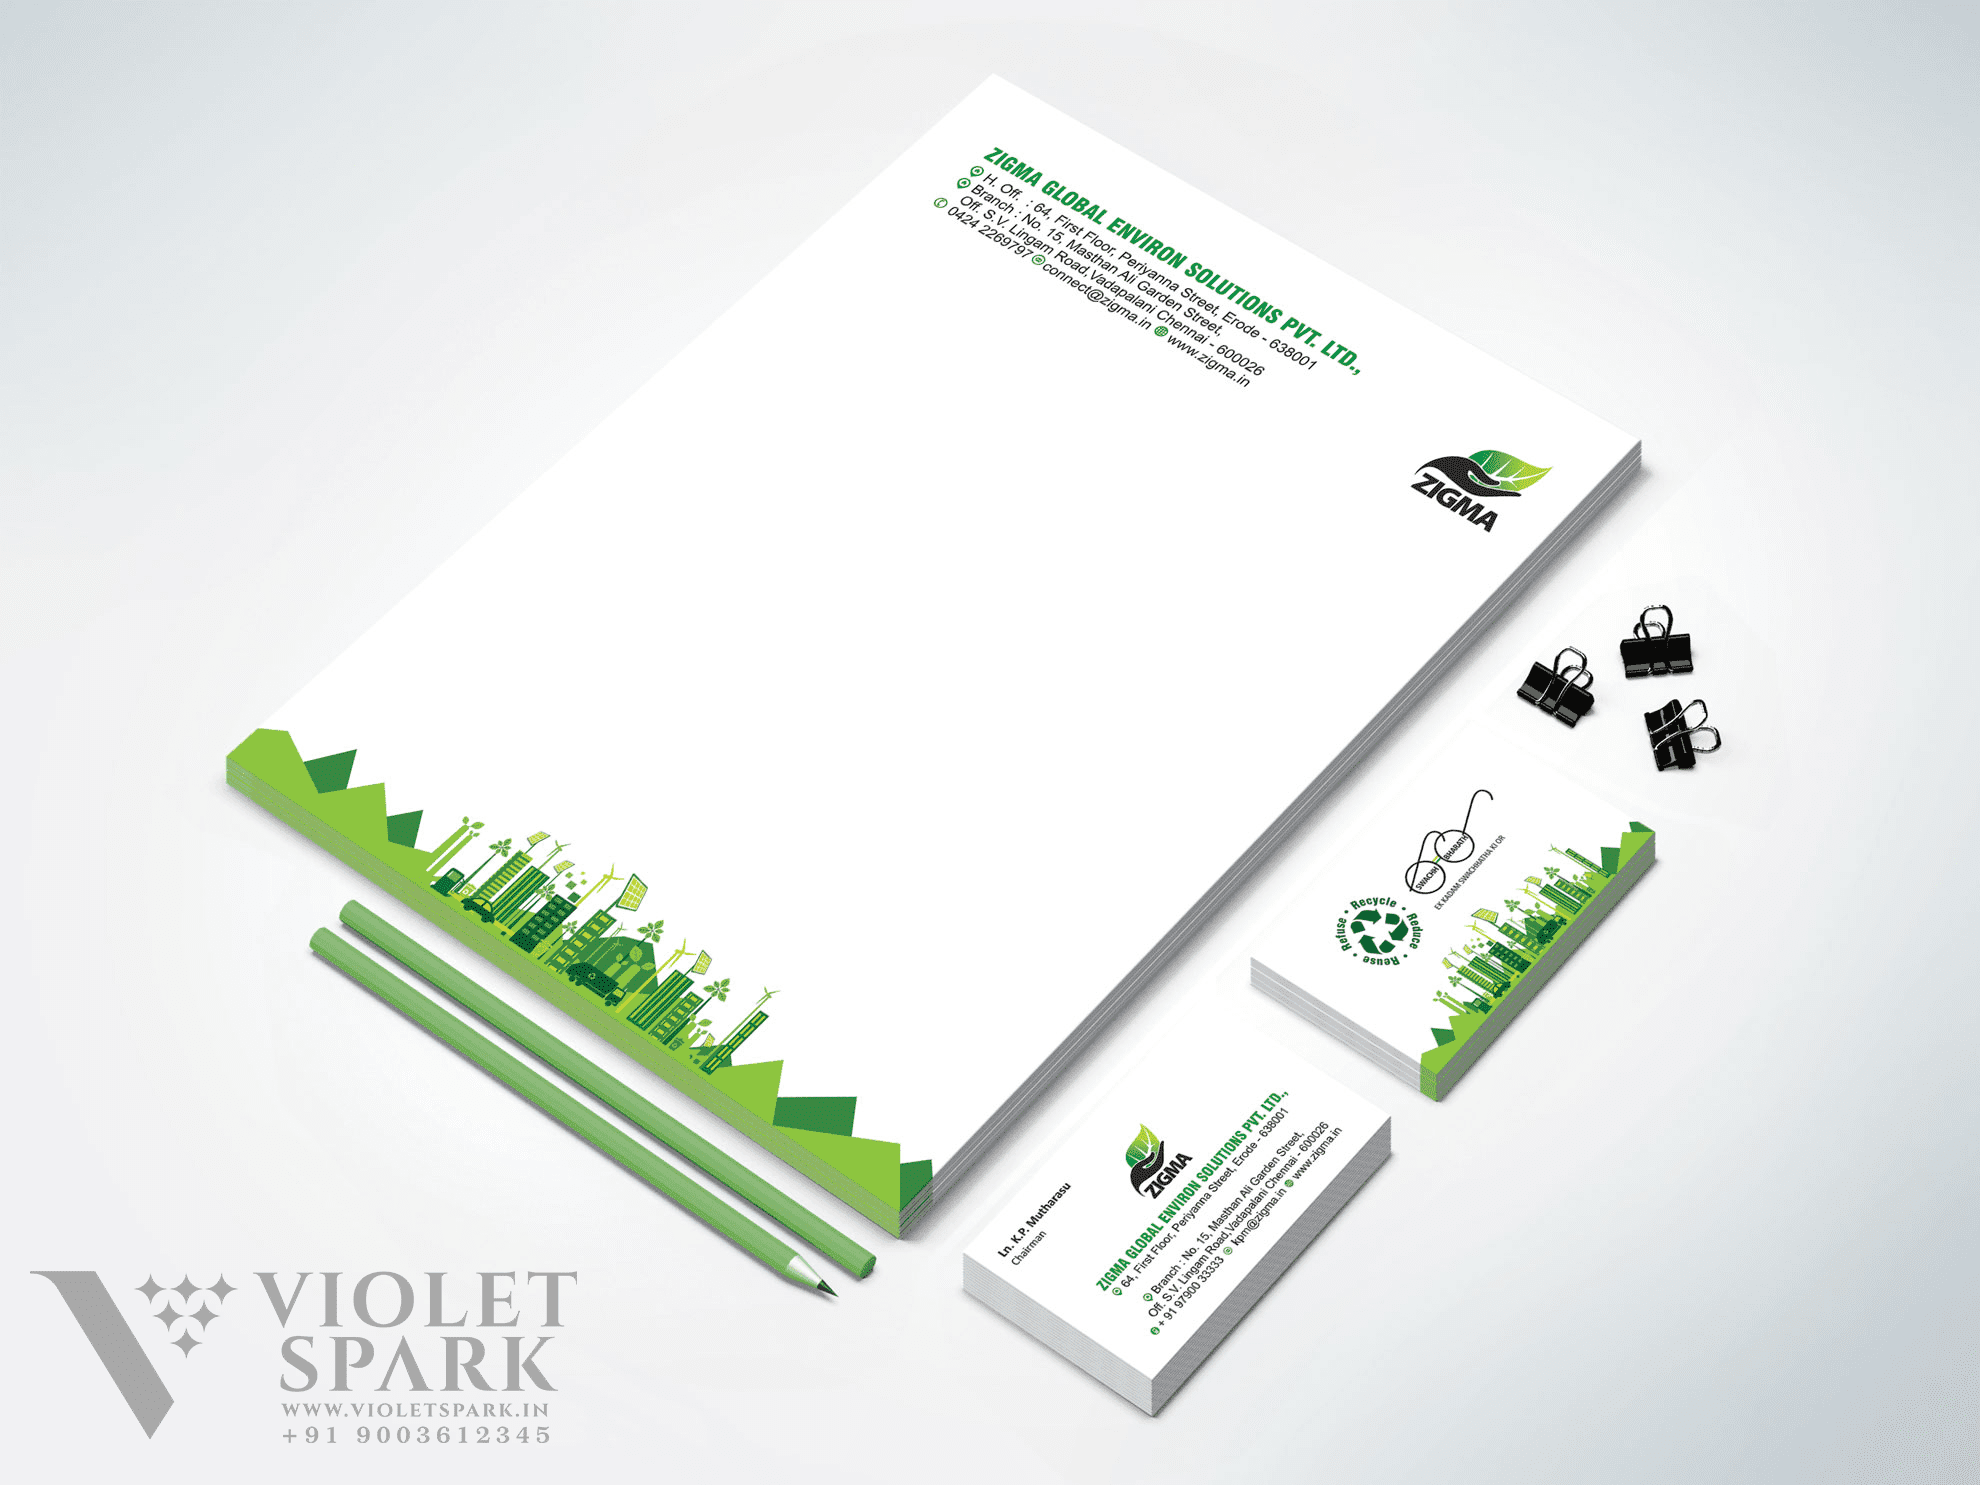 Zigma Global Environ Solutions Pvt Ltd Stationary Set Branding & Packaging Design in Chennai by Violet Spark